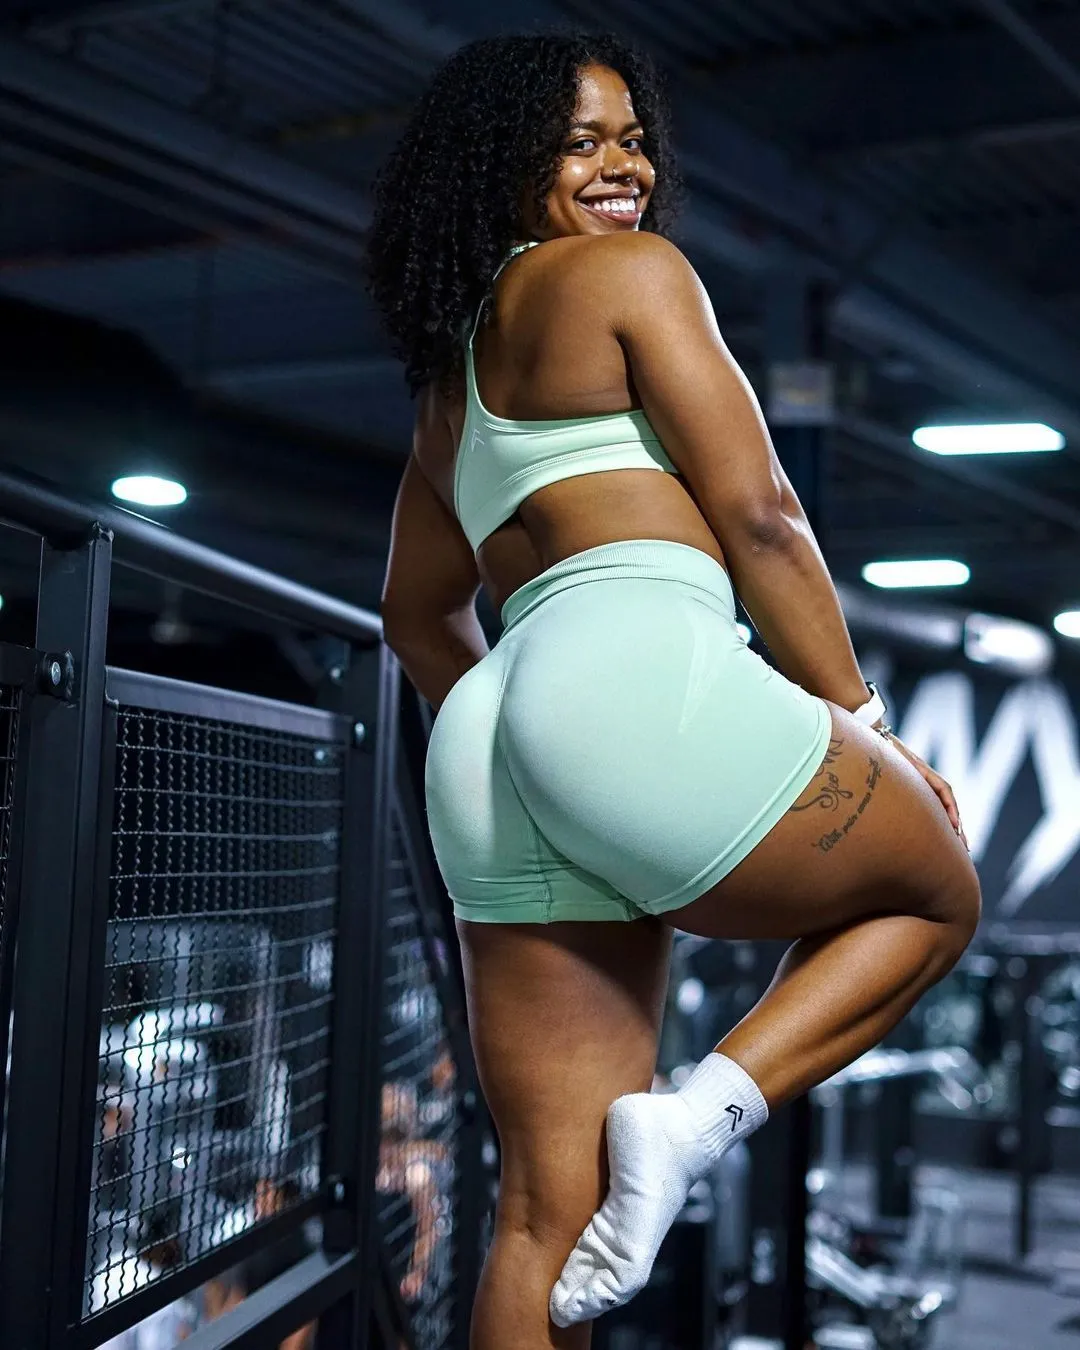 Womens Seamless Active Butt Crop Top And Shorts Scrunch Design For Gym,  Sports, And Training Wear From Hai04, $37.83